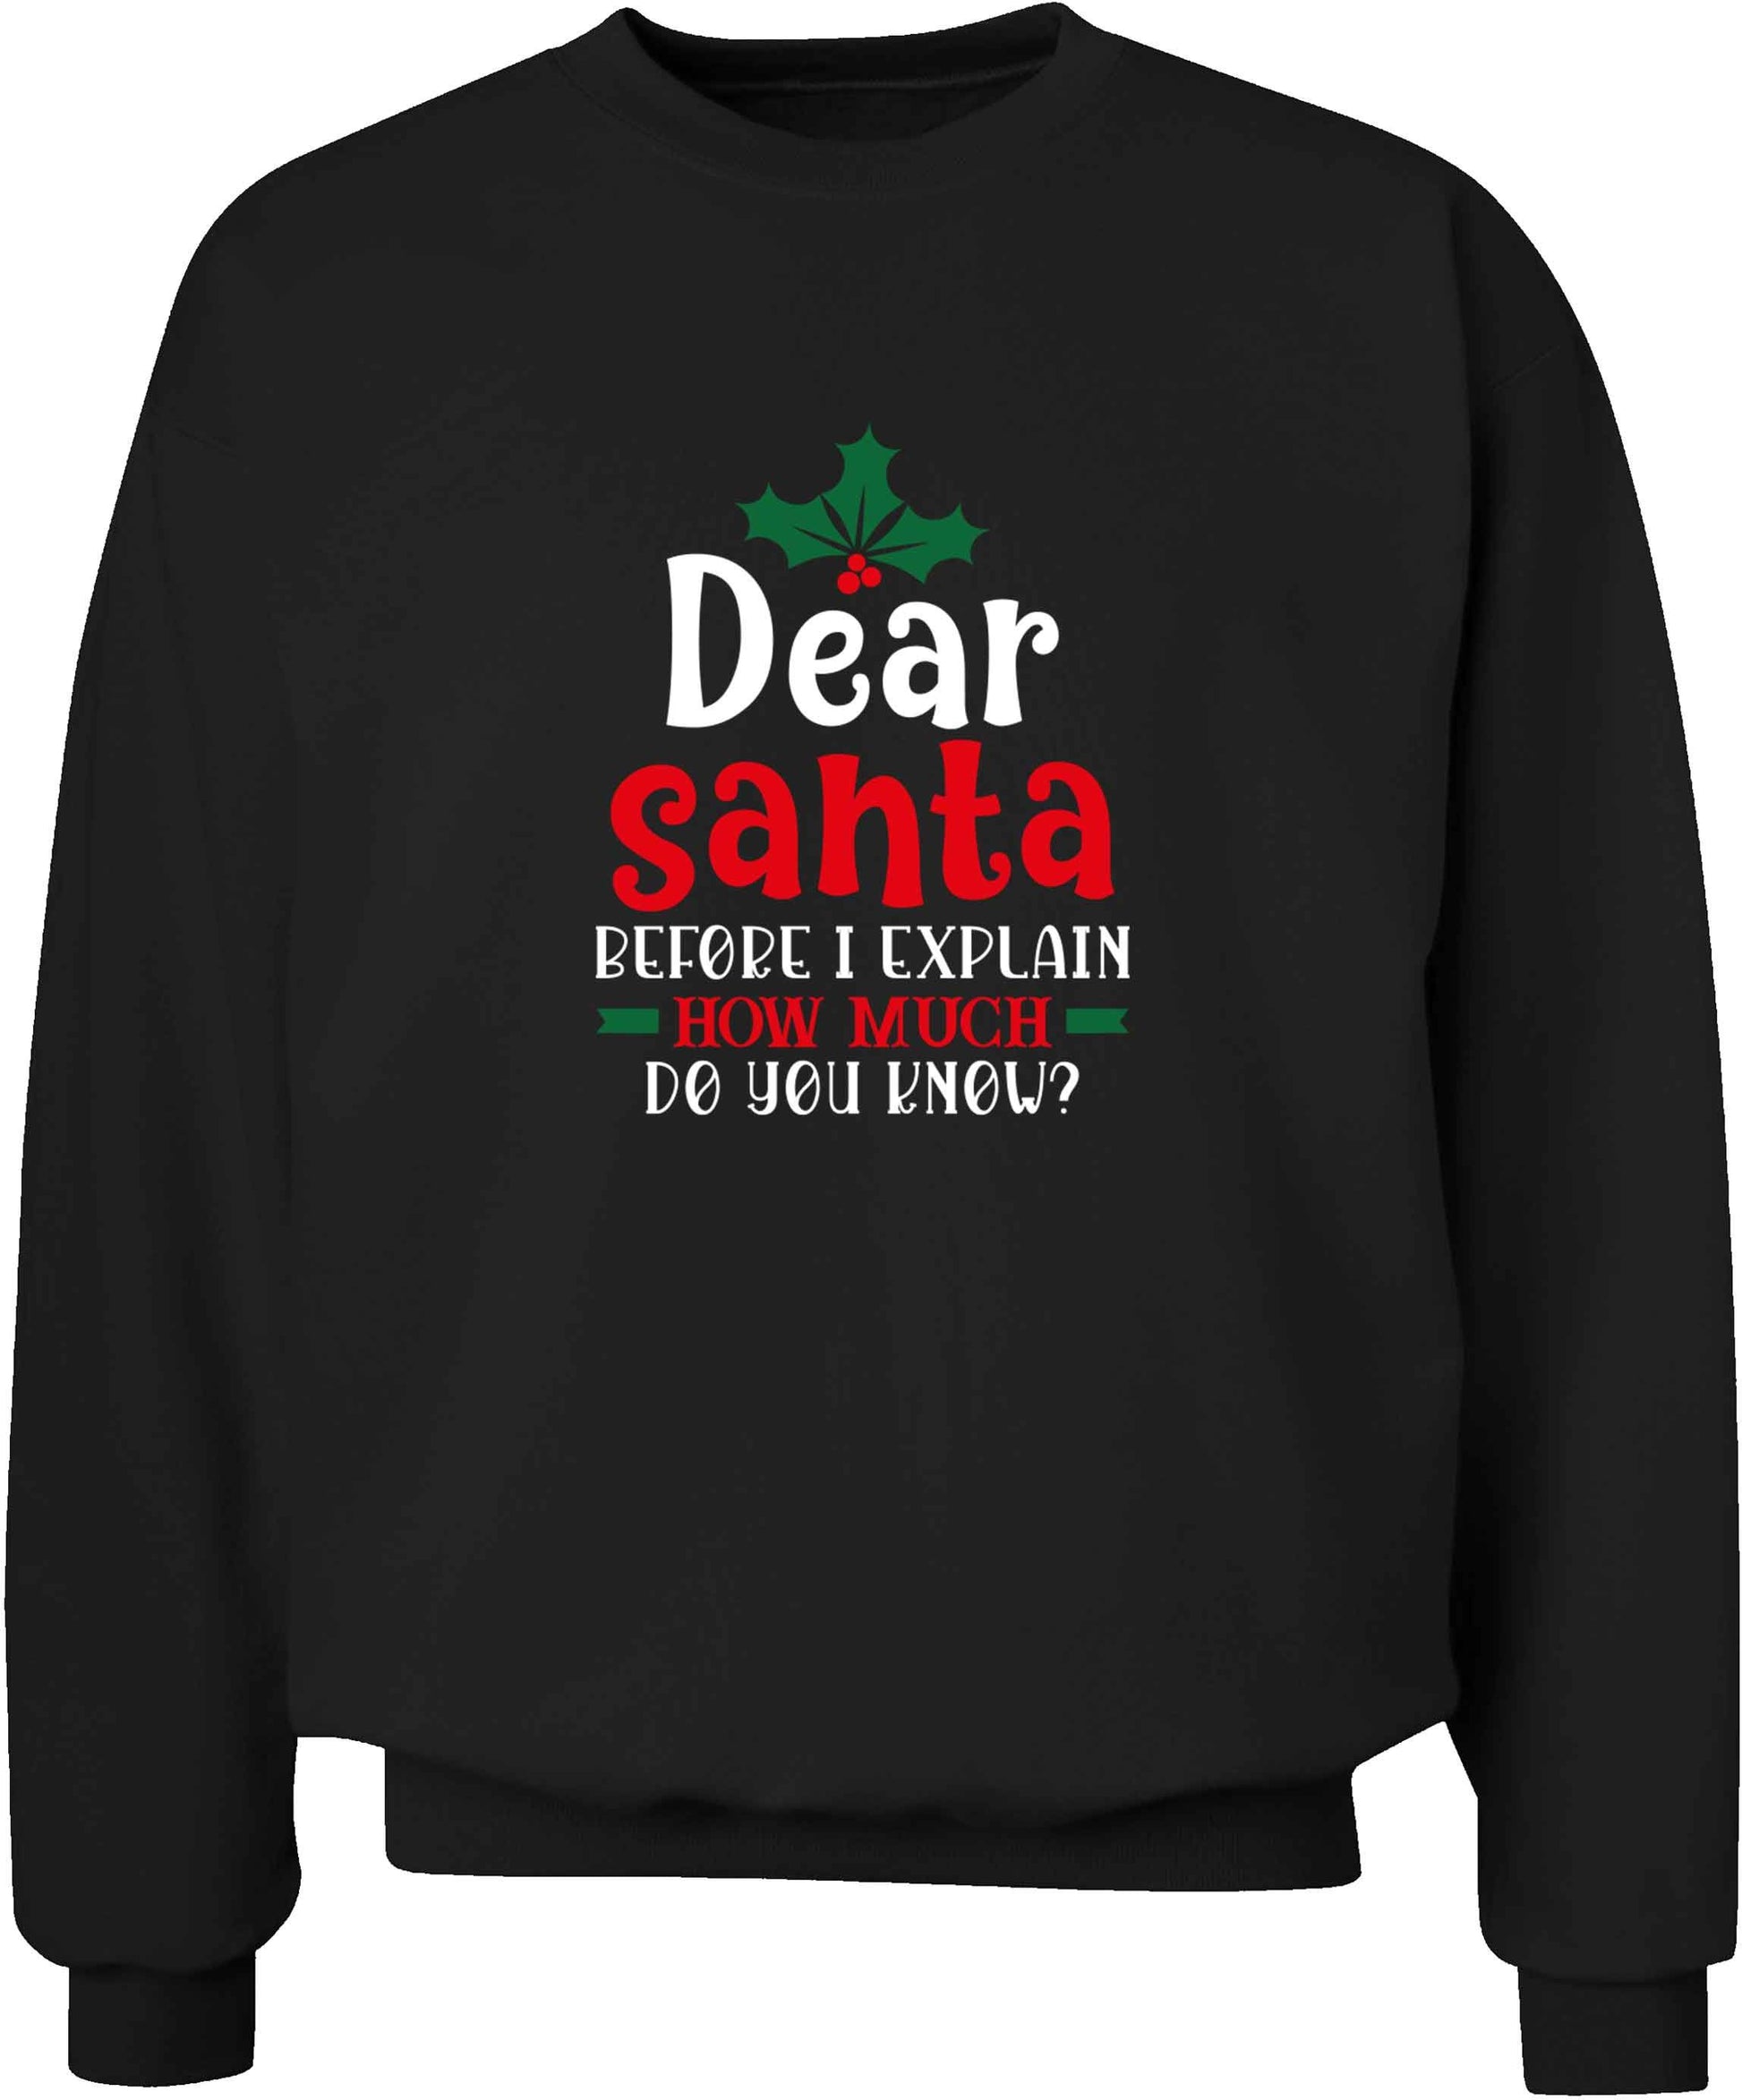 Santa before I explain how much do you know? adult's unisex black sweater 2XL